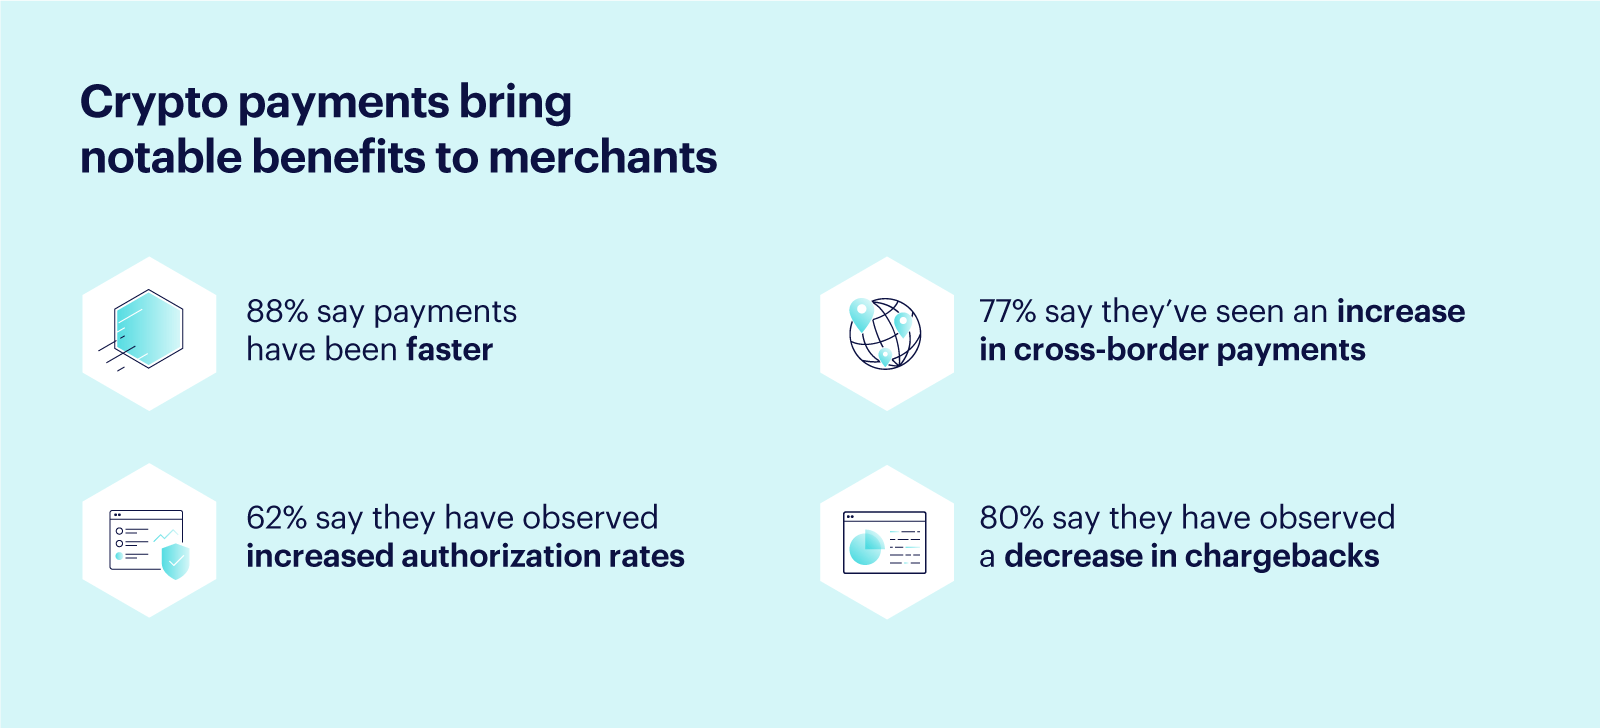 Crypto payments bring notable benefits to merchants